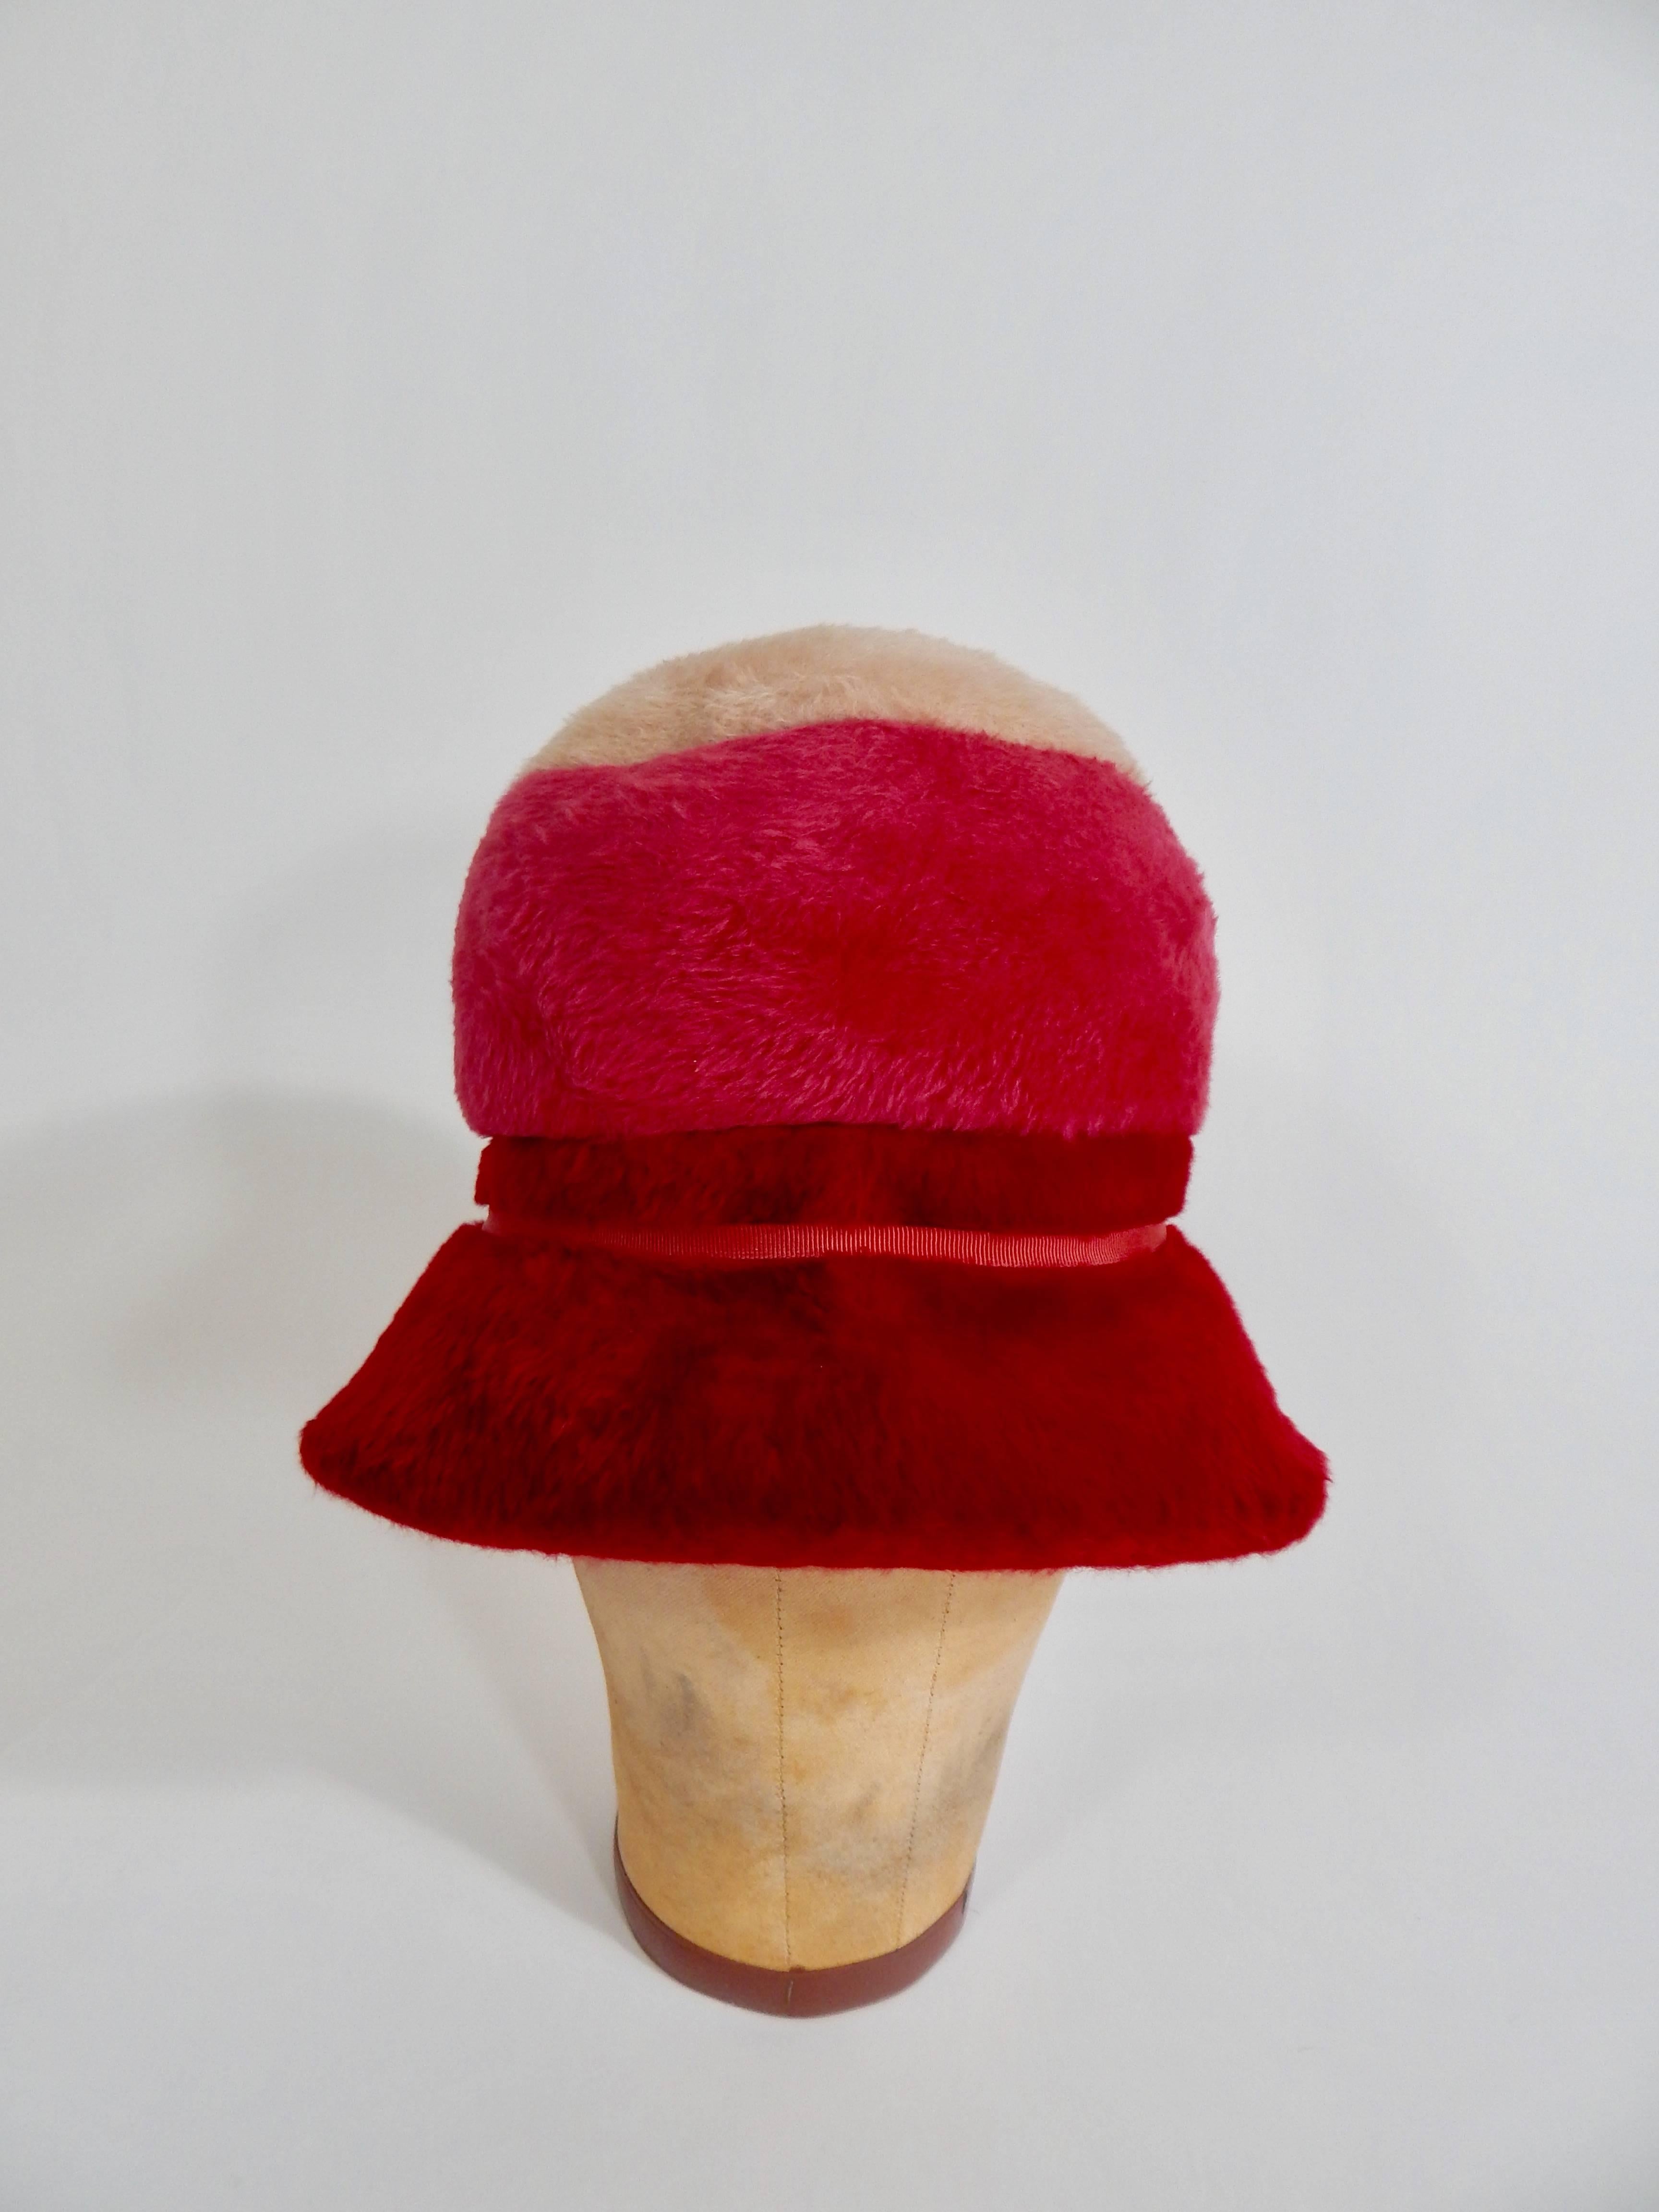 1950s Adolfo Paris New York Hat. Body Made in Italy for Adolfo. Red, Dark Pink and Tan. Size 21 7/8 inches.